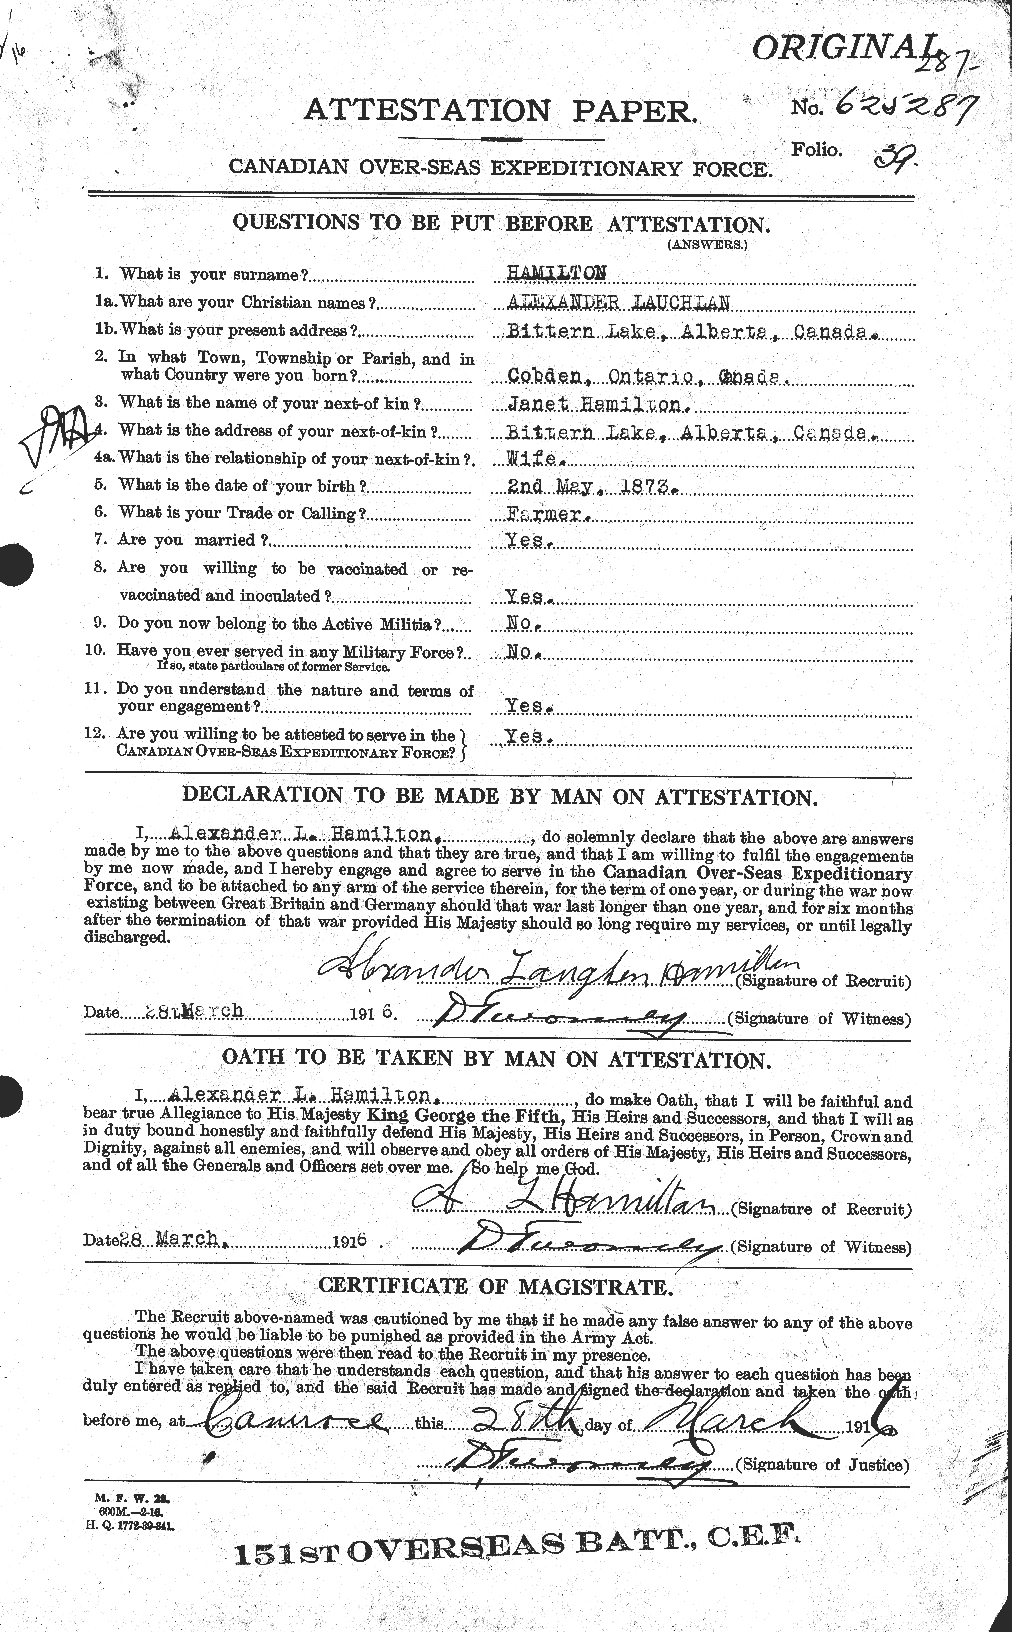 Personnel Records of the First World War - CEF 375207a